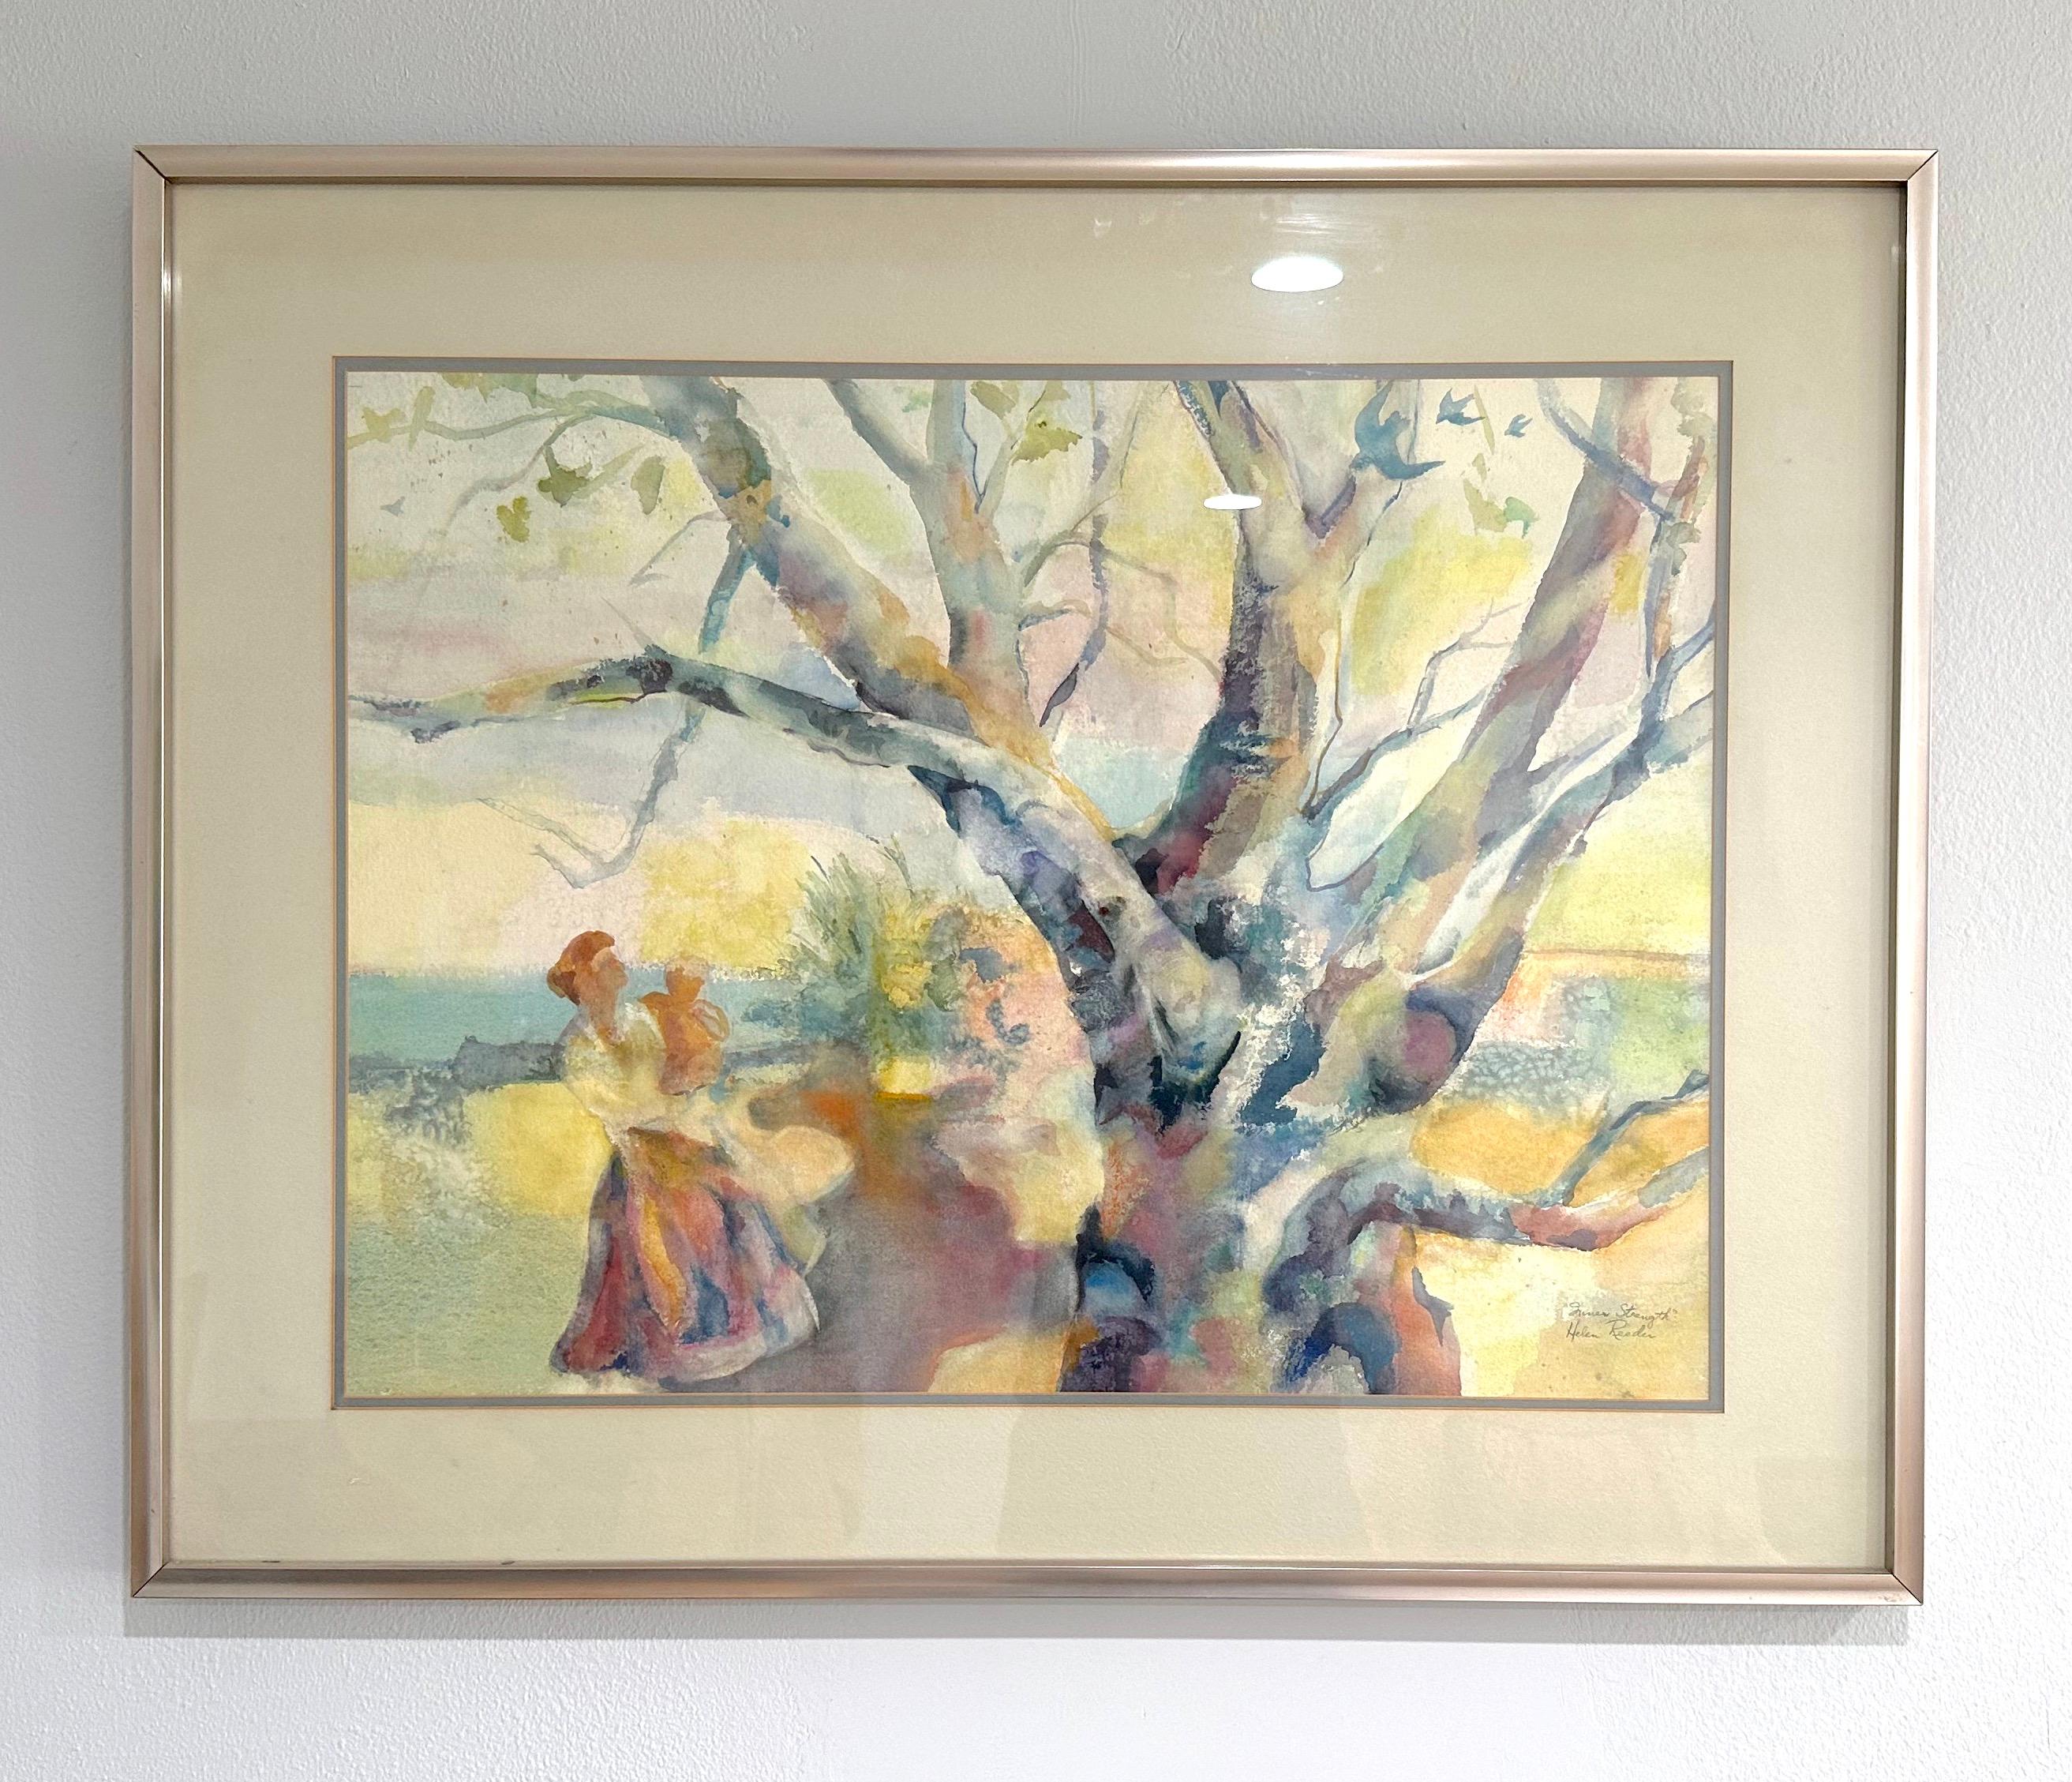 Summer Strength, Tree, Landscape, Original Watercolor Painting, Ready to Hang - Art by Helen Reeden